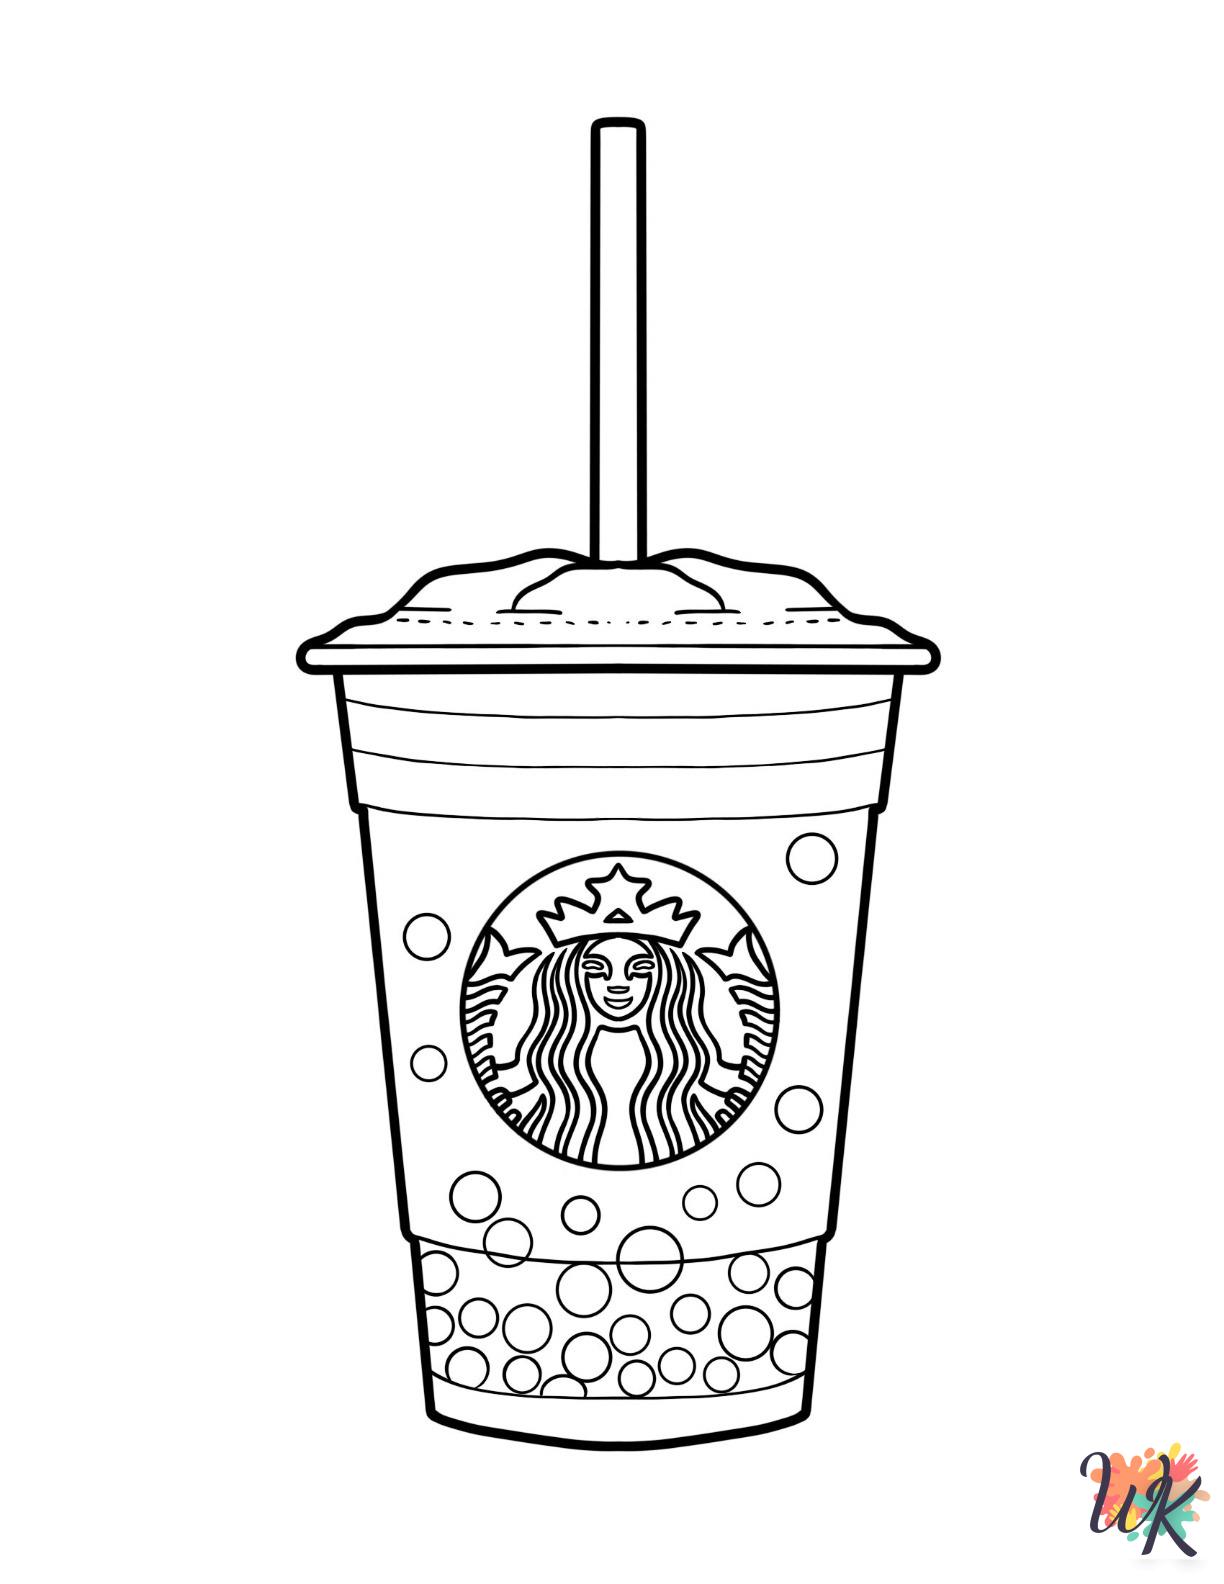 Boba Tea themed coloring pages